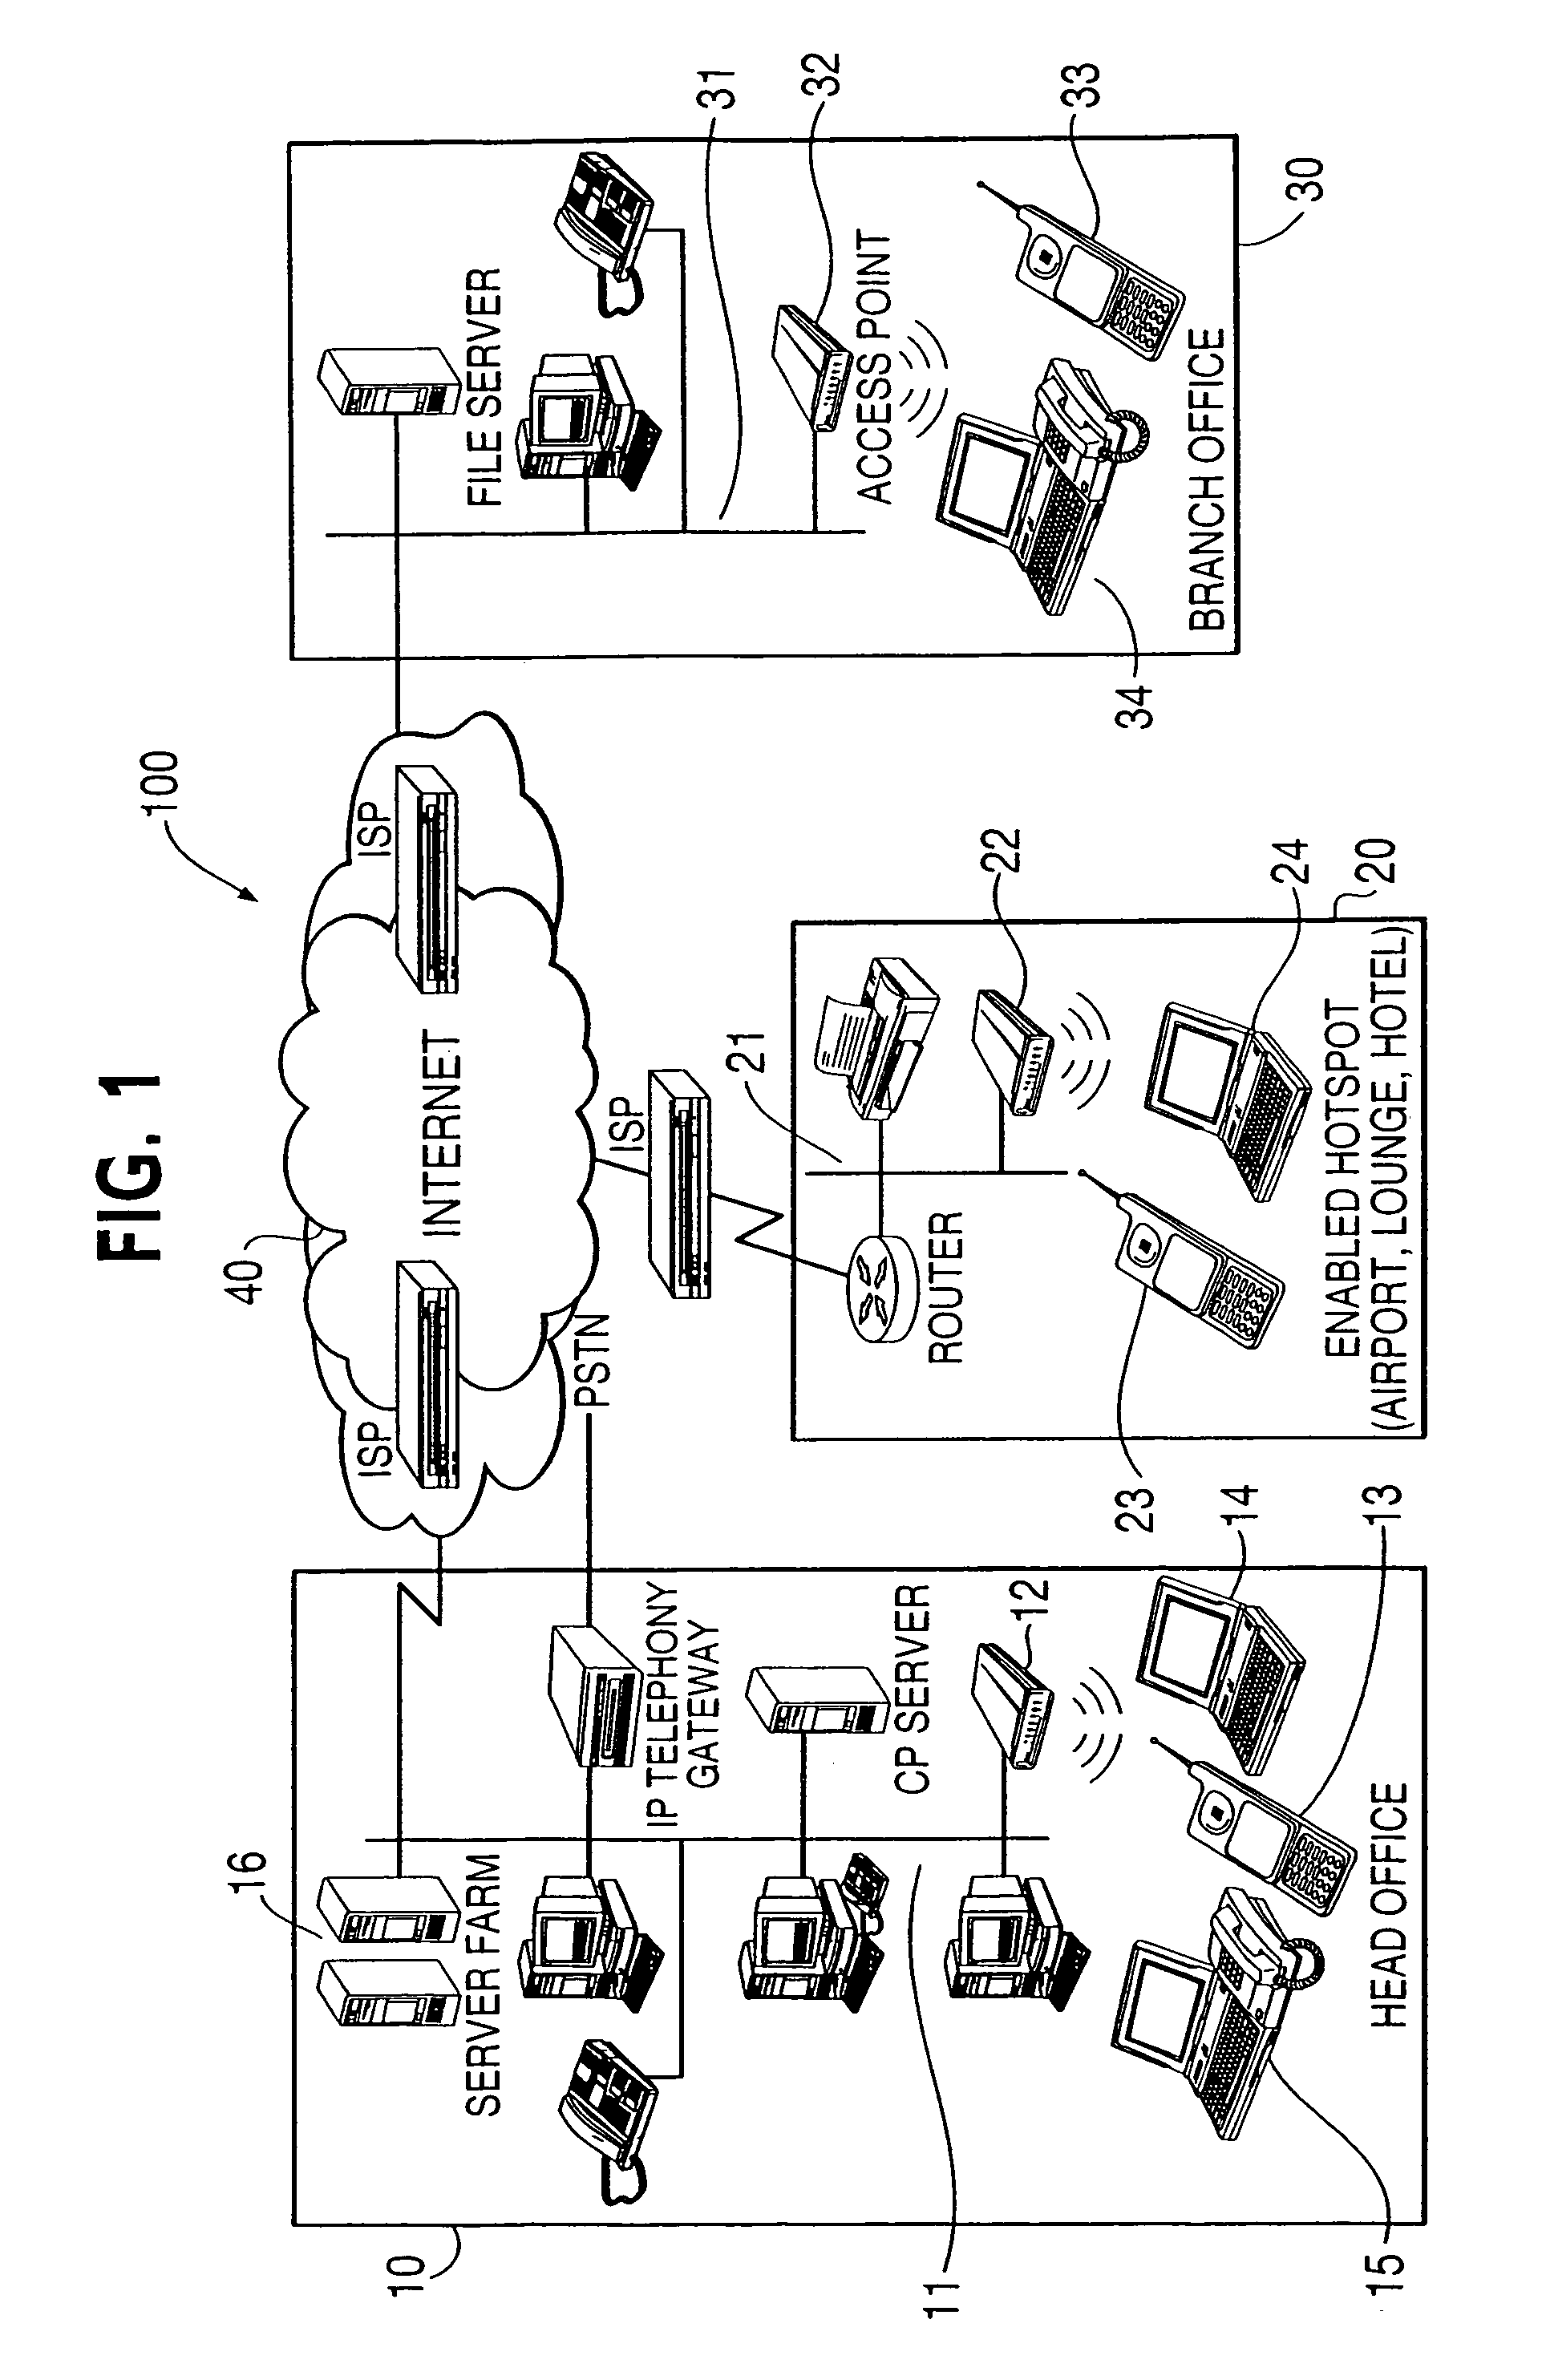 Method and system for making accessible wirelessly a network phonebook and journal database